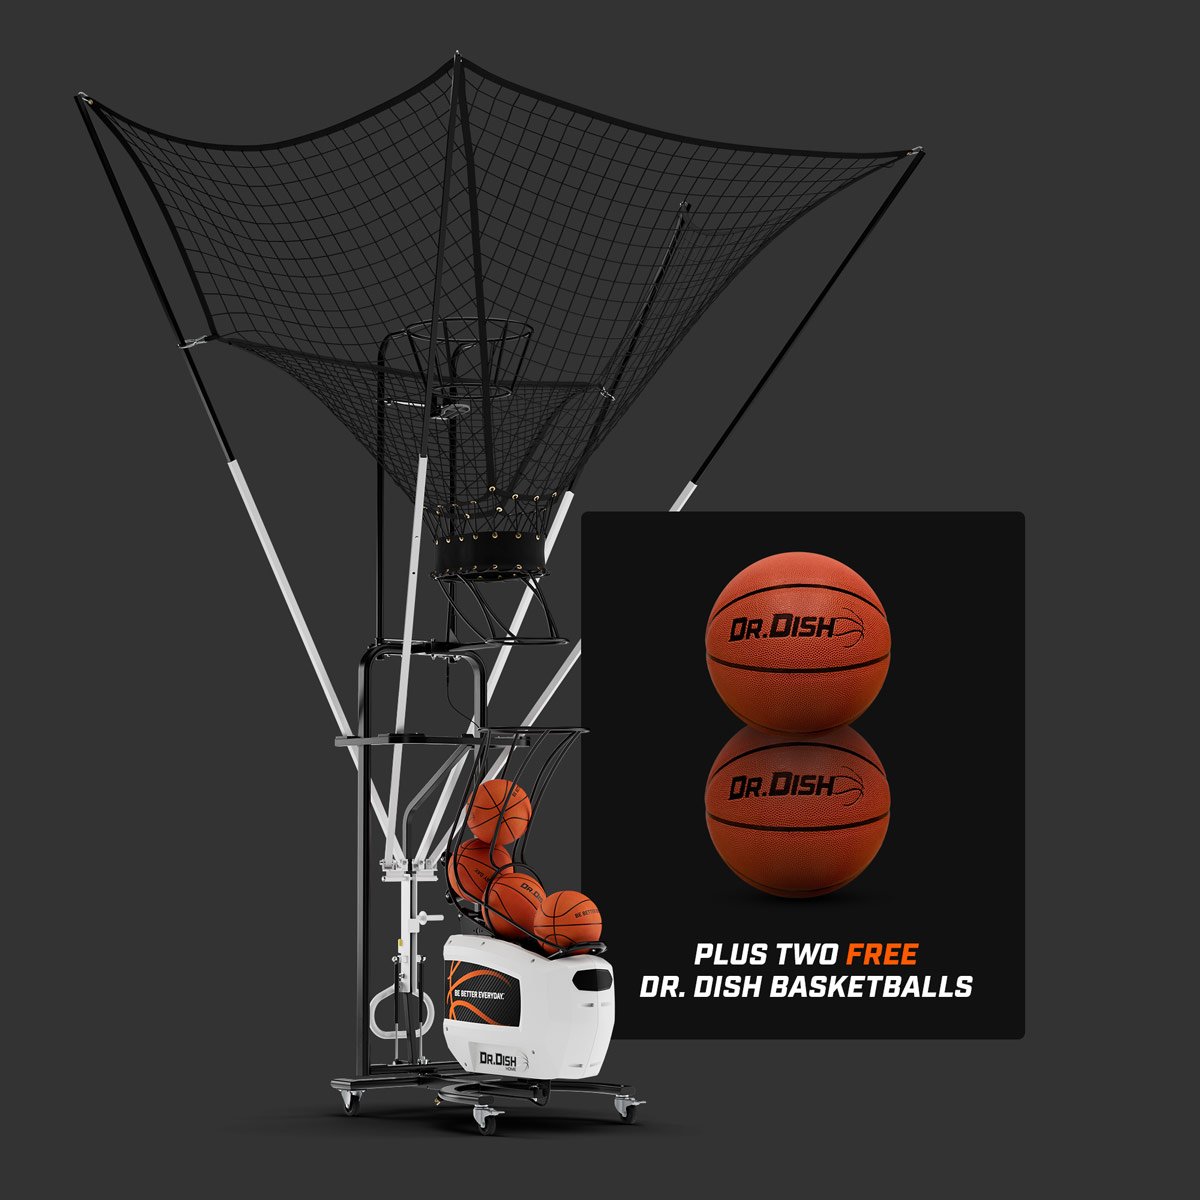 Dr. Dish Home Basketball Shooting Machine  - Two Free Dr. Dish Basketballs Offer